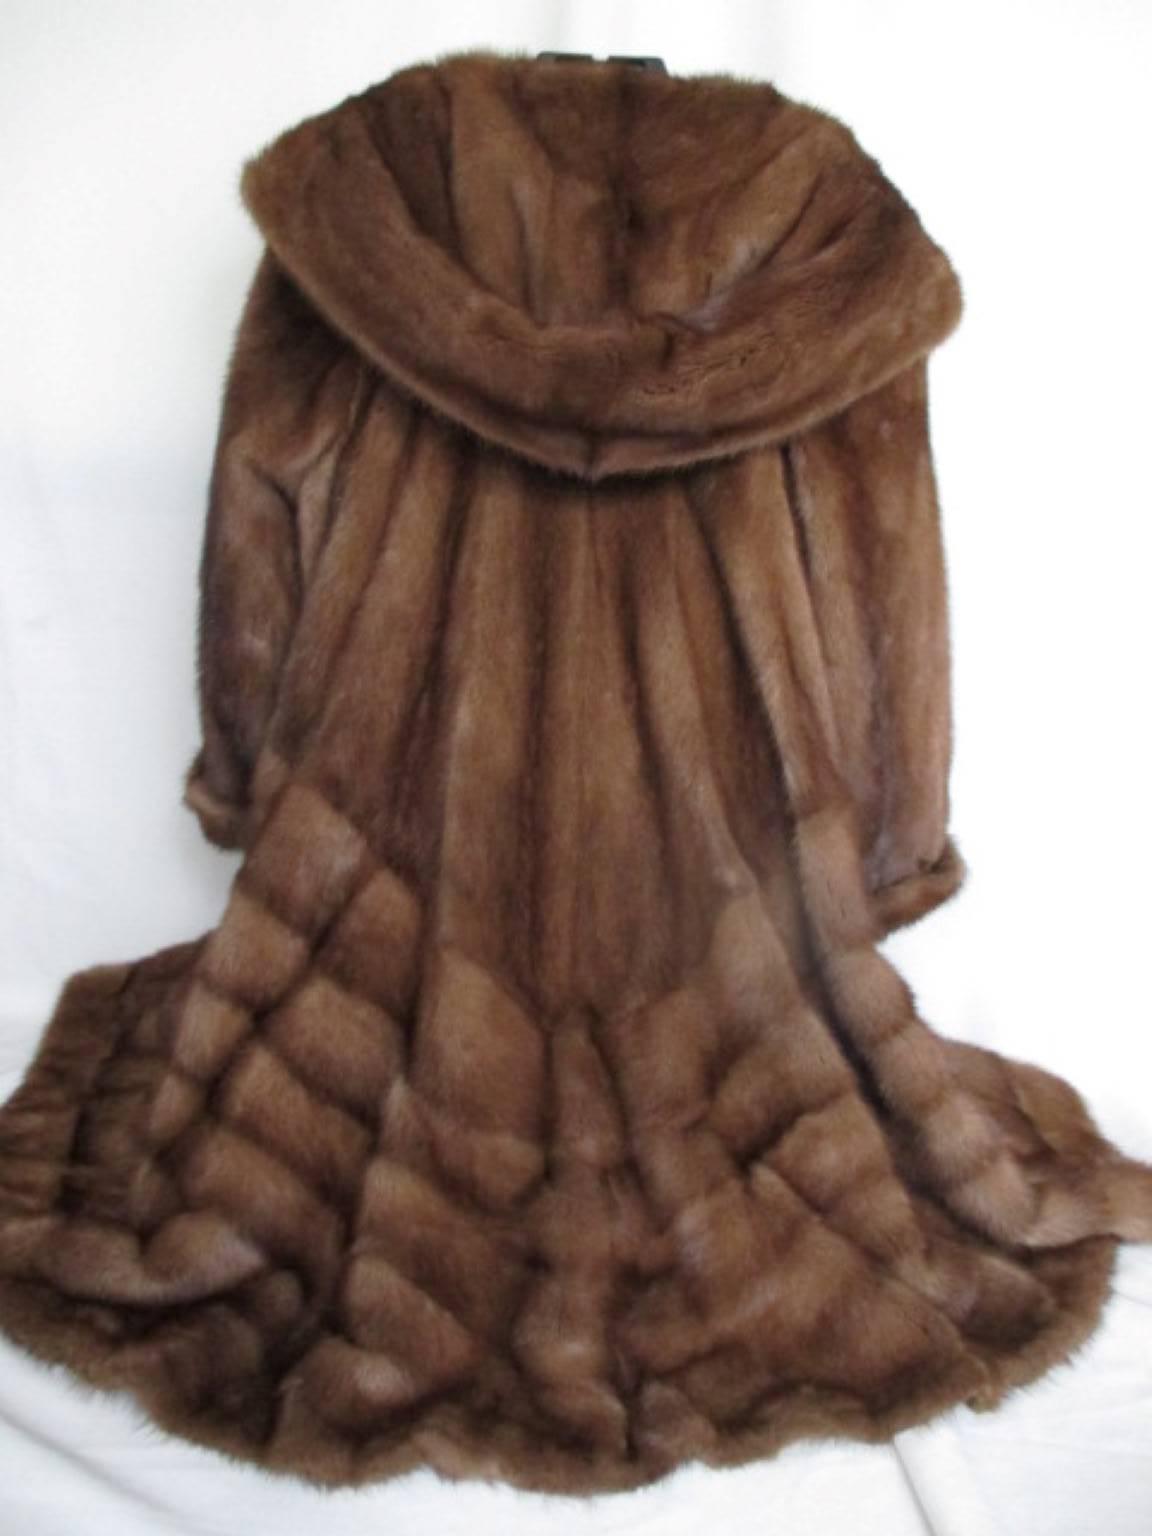 This flared 3/4 length chestnut brown mink coat is made of quality fur with a large hood, 2 buttons at the collar, 3 closing hooks and 2 velvet pockets.
It's in good vintage condition with some minimal wear at the cuffs.
These coats are rare to